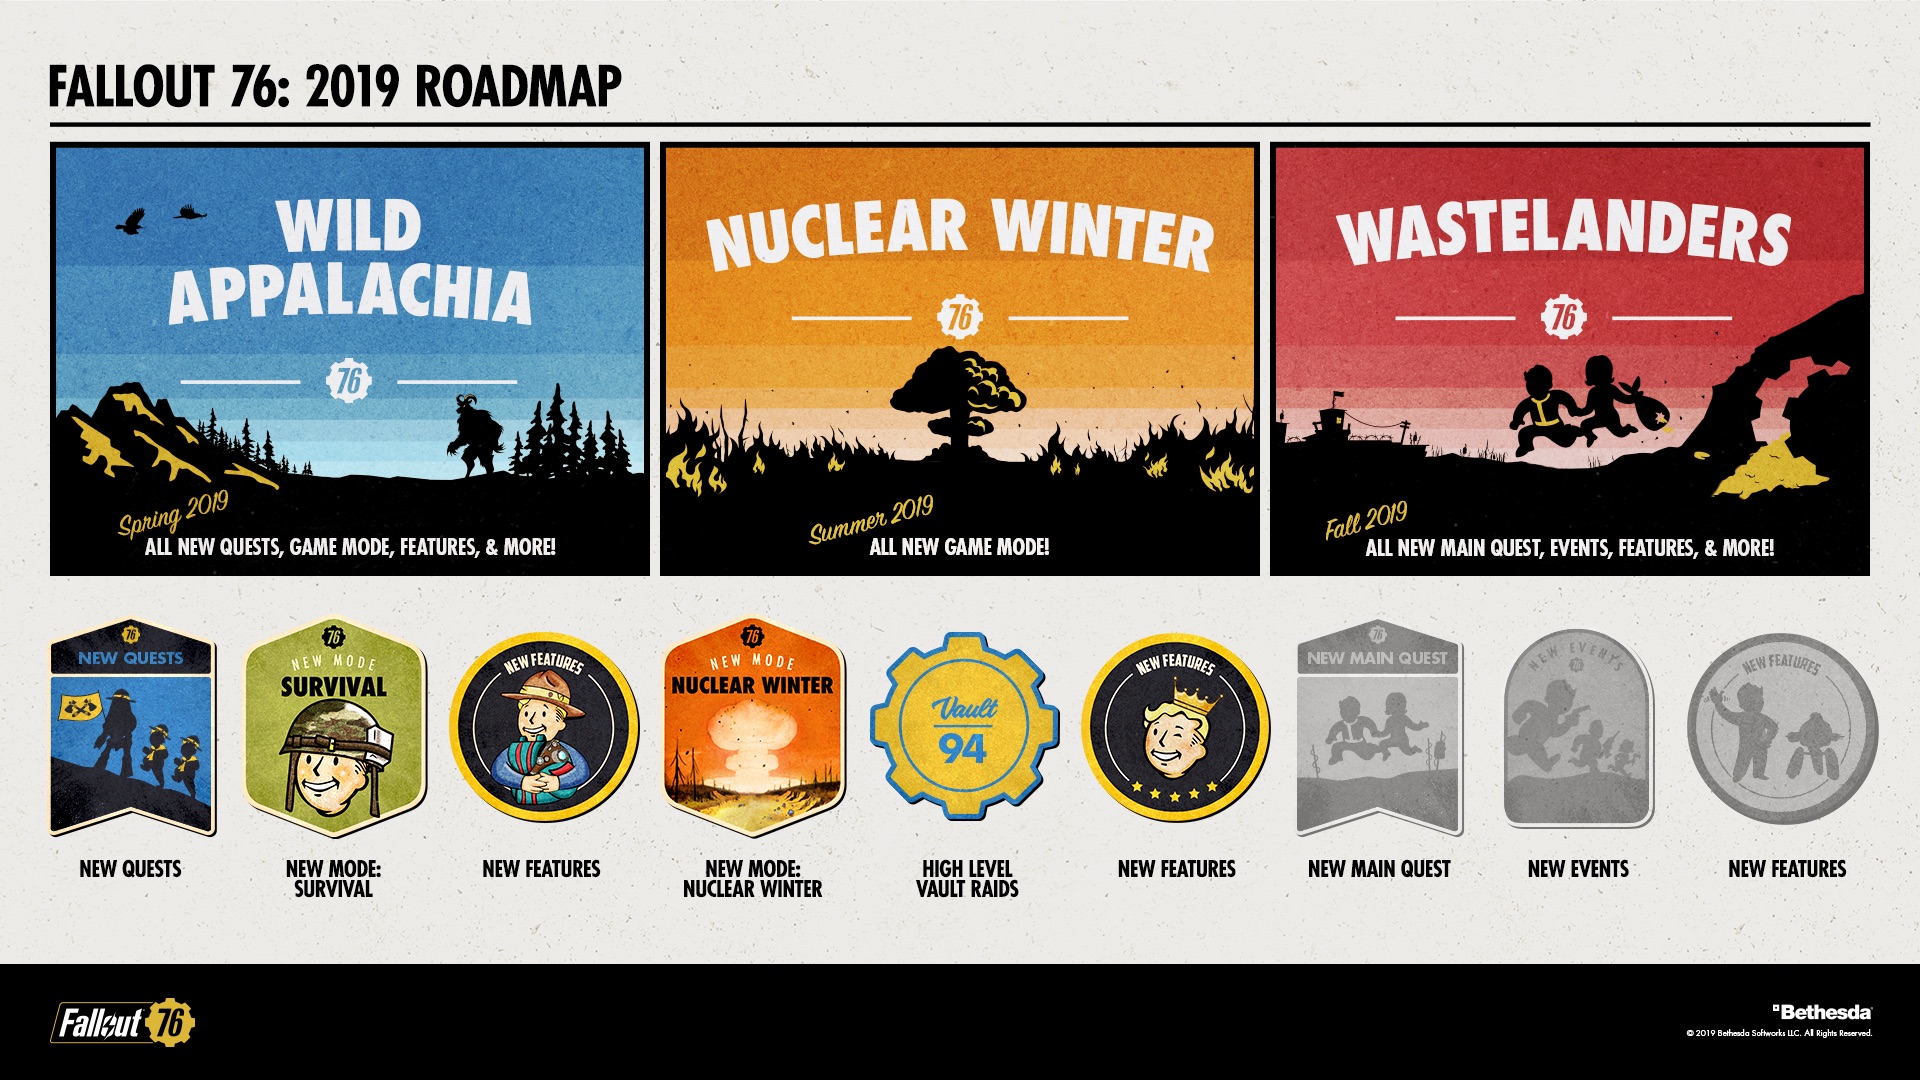 Whats in Store for Fallout 76 - 2019 Roadmap - picture #2